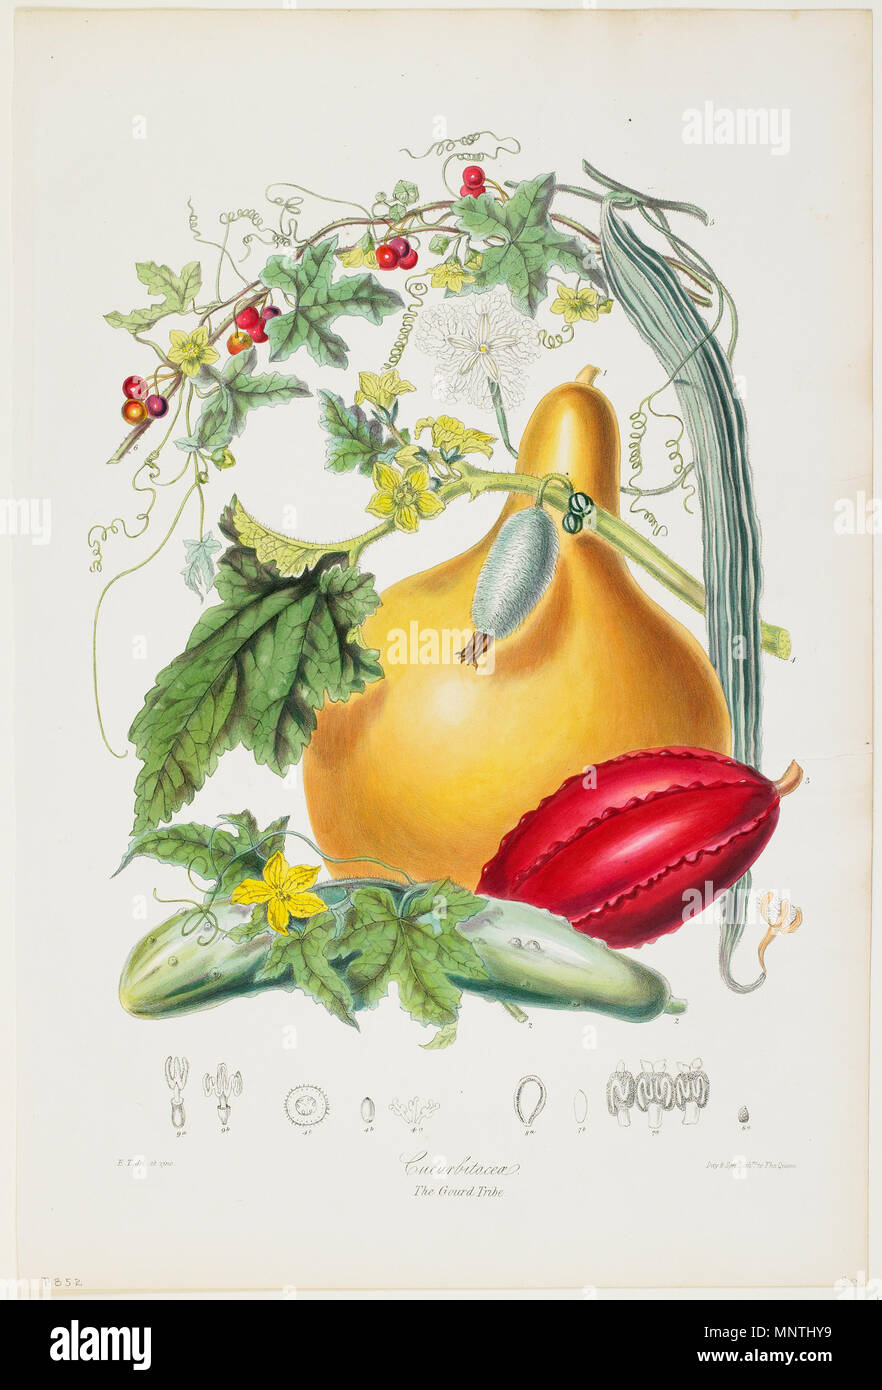 Elizabeth Twining, British, 1805 - 1889; Cucurbitaceae, The Gourd Tribe,  from Illustrations of the Natural Orders of Plants; 1849-1855; Hand-colored  lithograph; 16 x 10 1/4 in. (40.64 x 26.04 cm) (image); Minneapolis